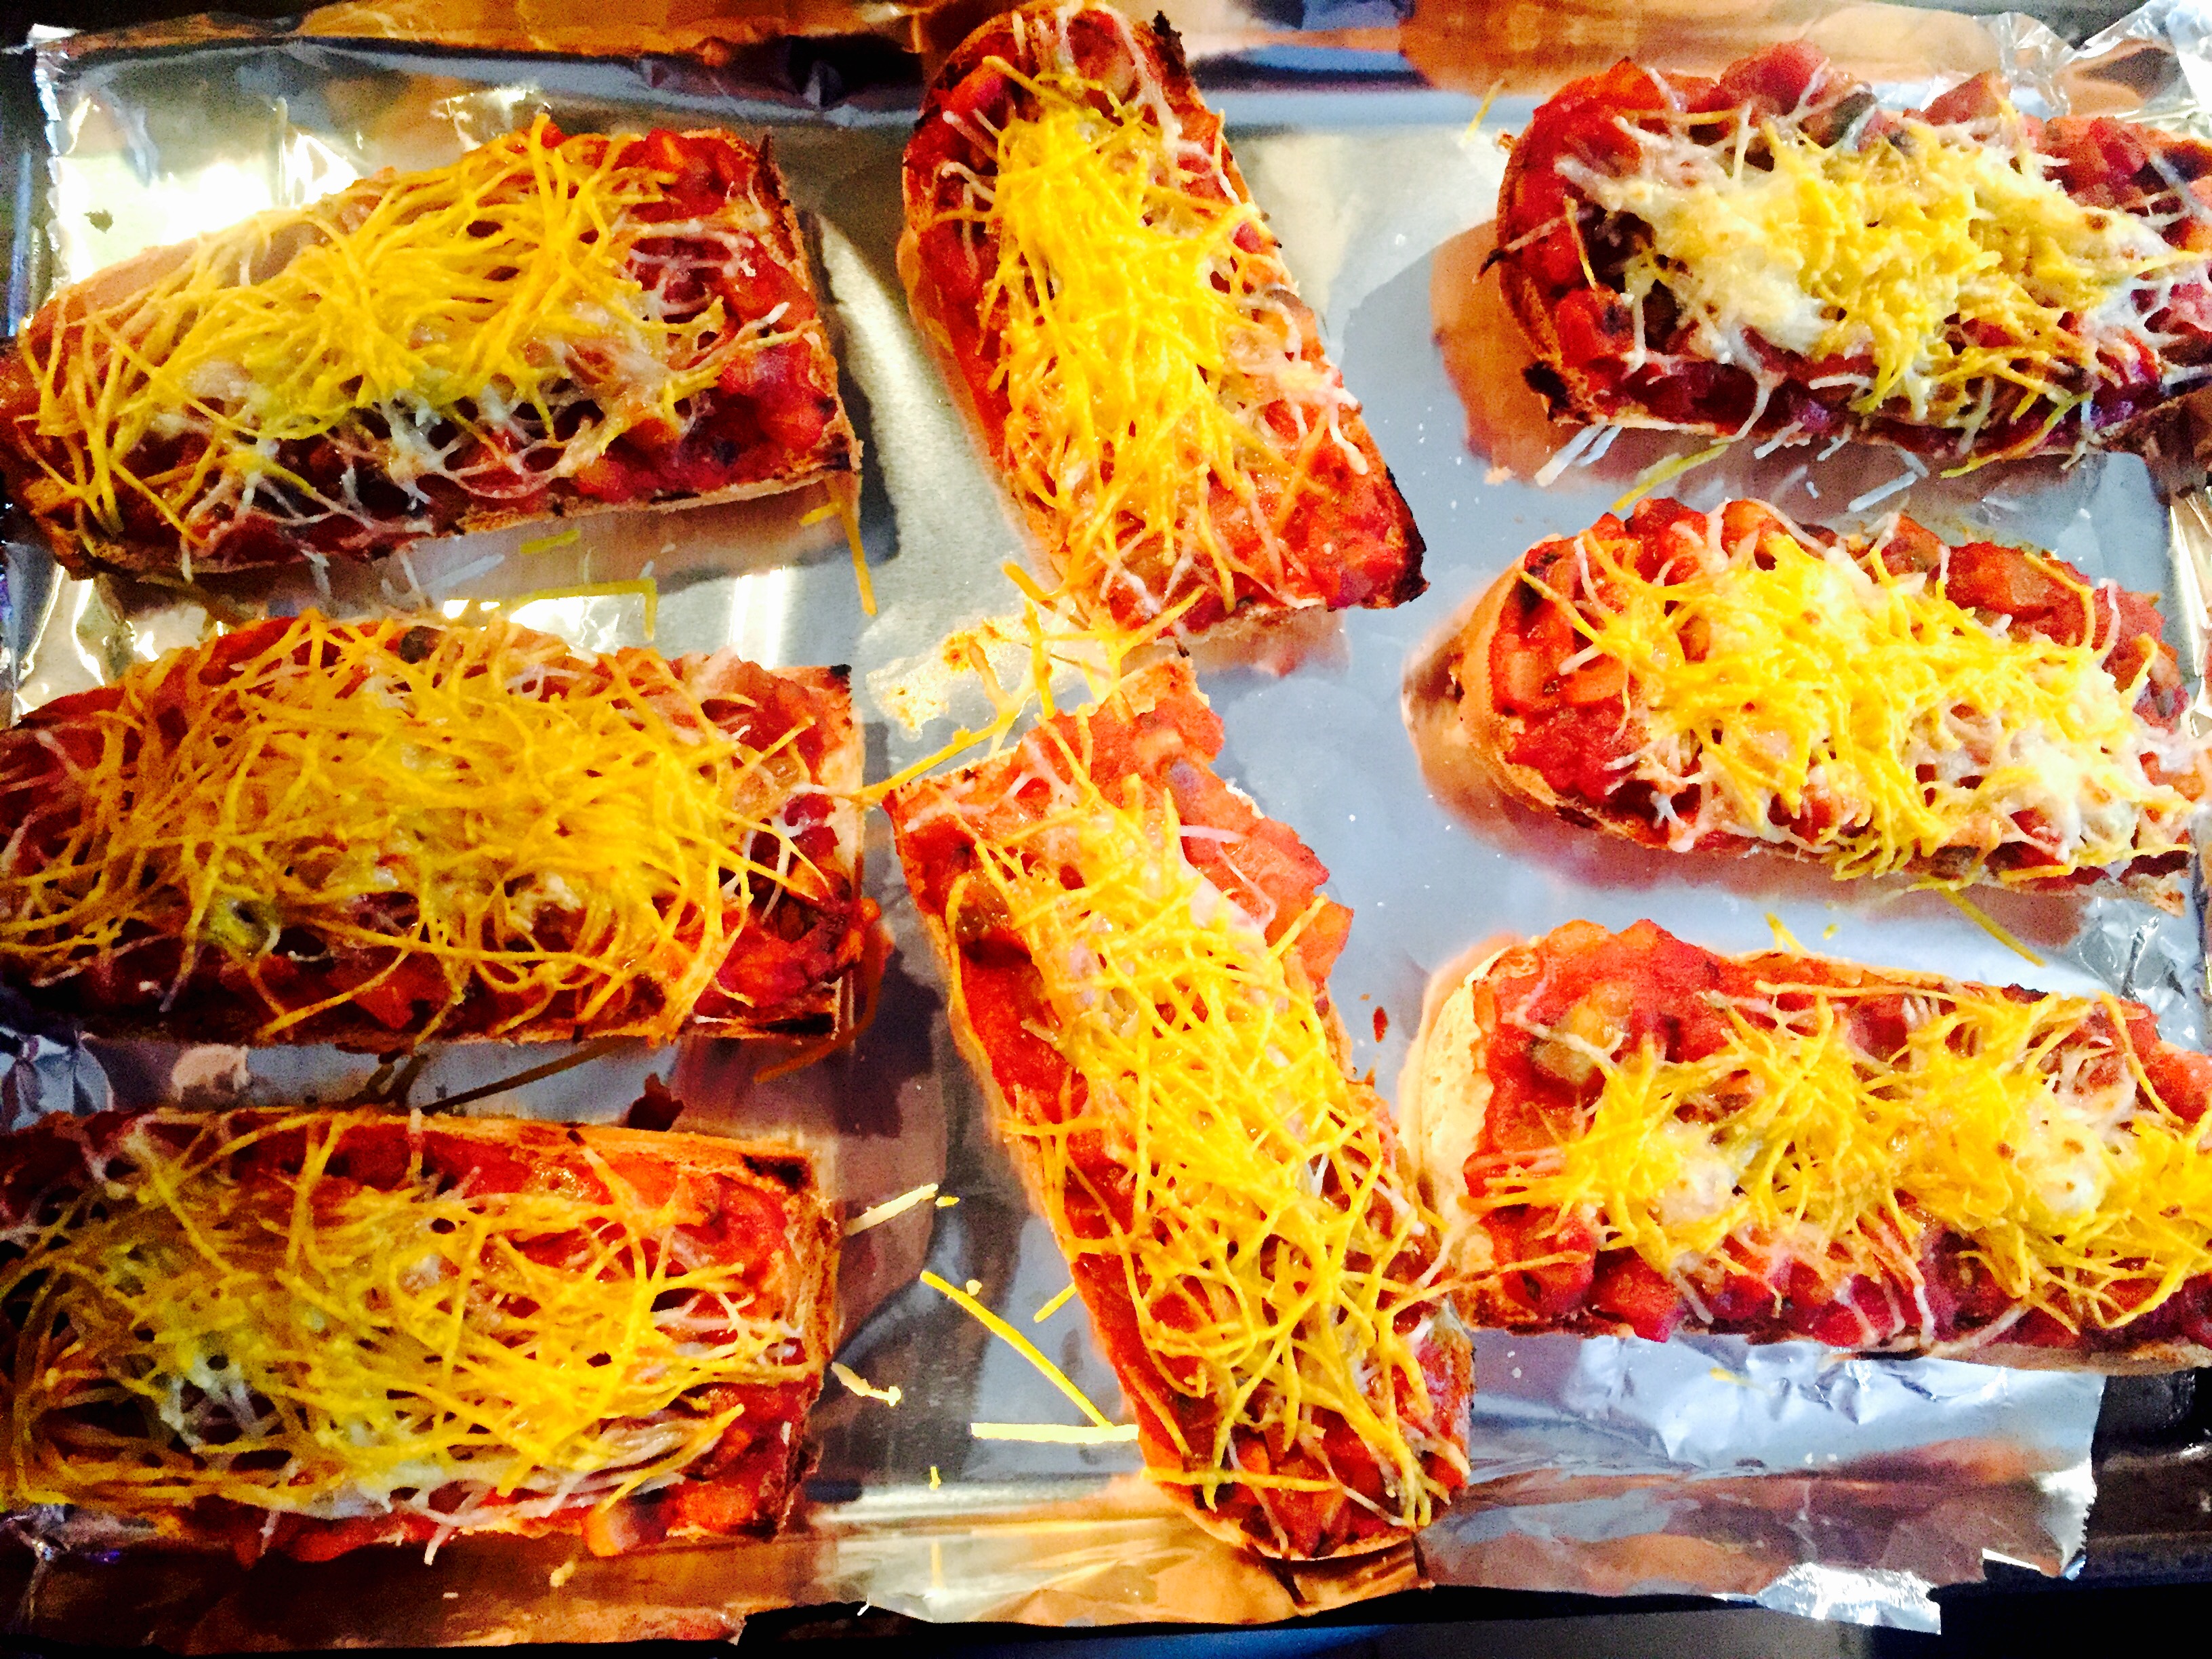 Ultimate comfort food ... Spaghetti sauce on gluten free baguettes with dairy free grated cheese broiled to perfection